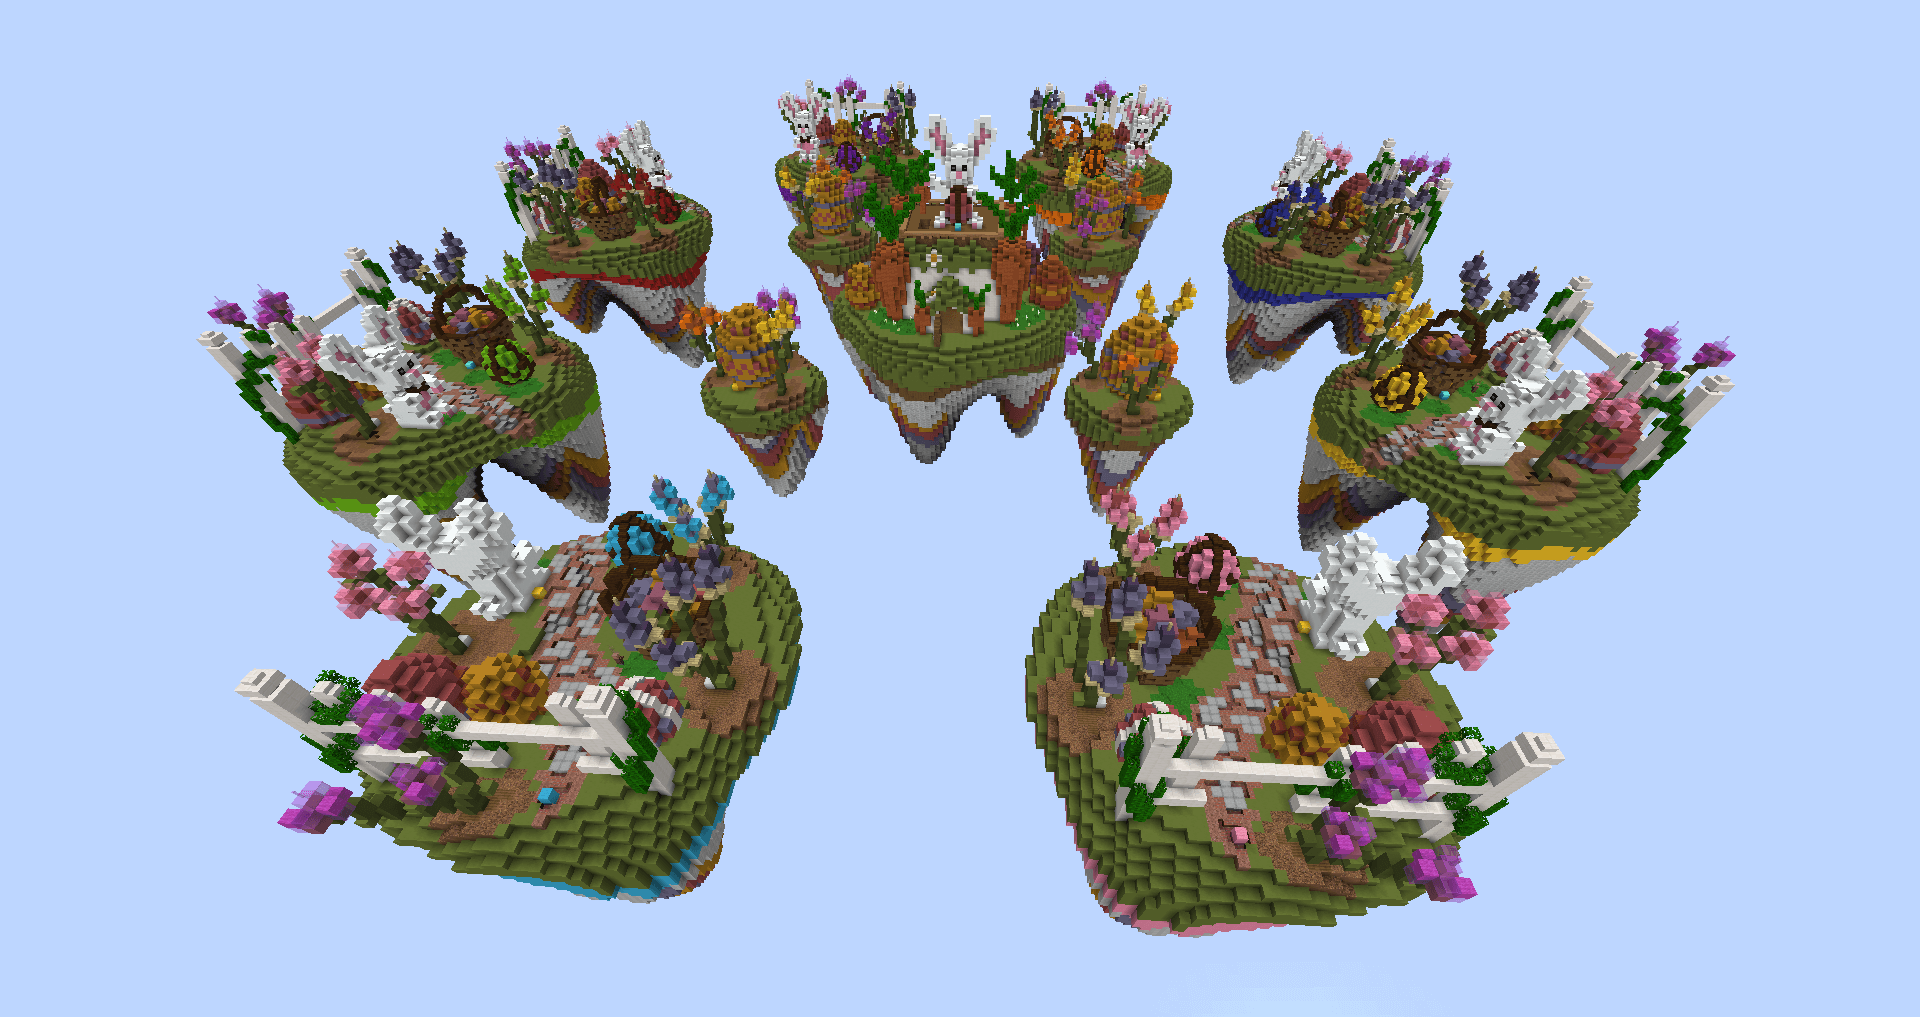 Spring Is Here Lobby Egg Hunt Maps Bundles Cubelets More